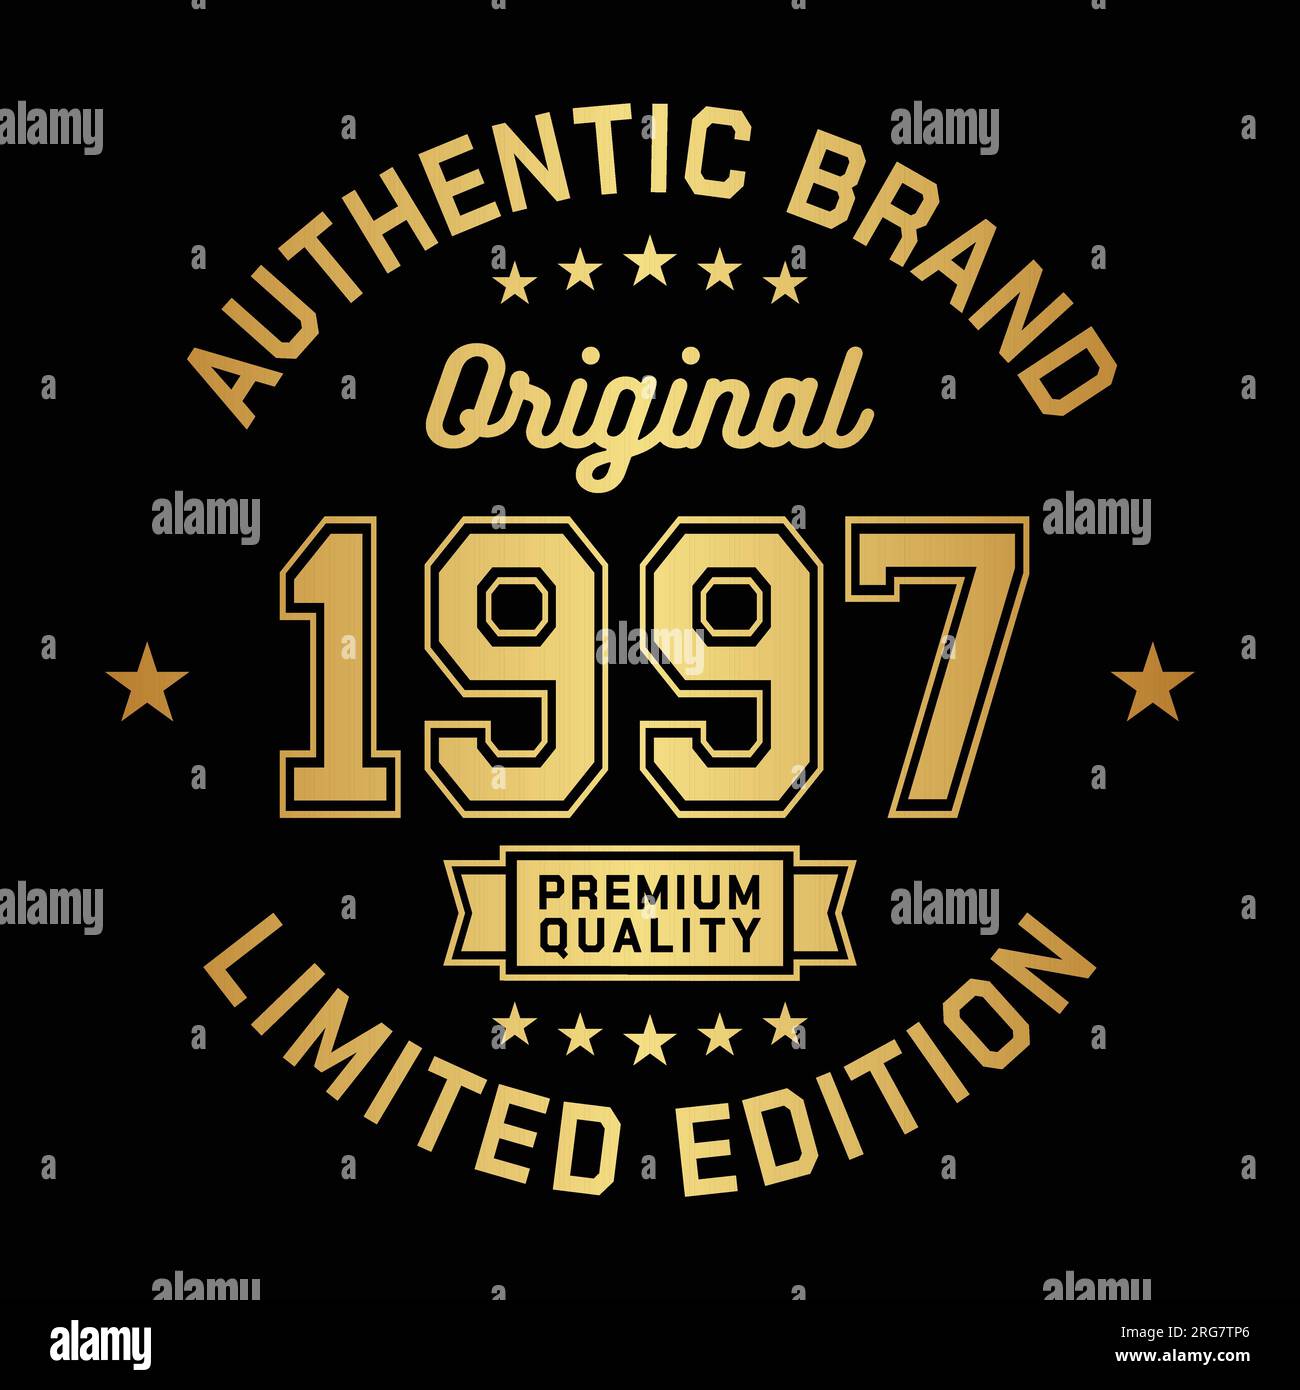 1997 Authentic brand. Apparel fashion design. Graphic design for t-shirt. Vector and illustration. Stock Vector